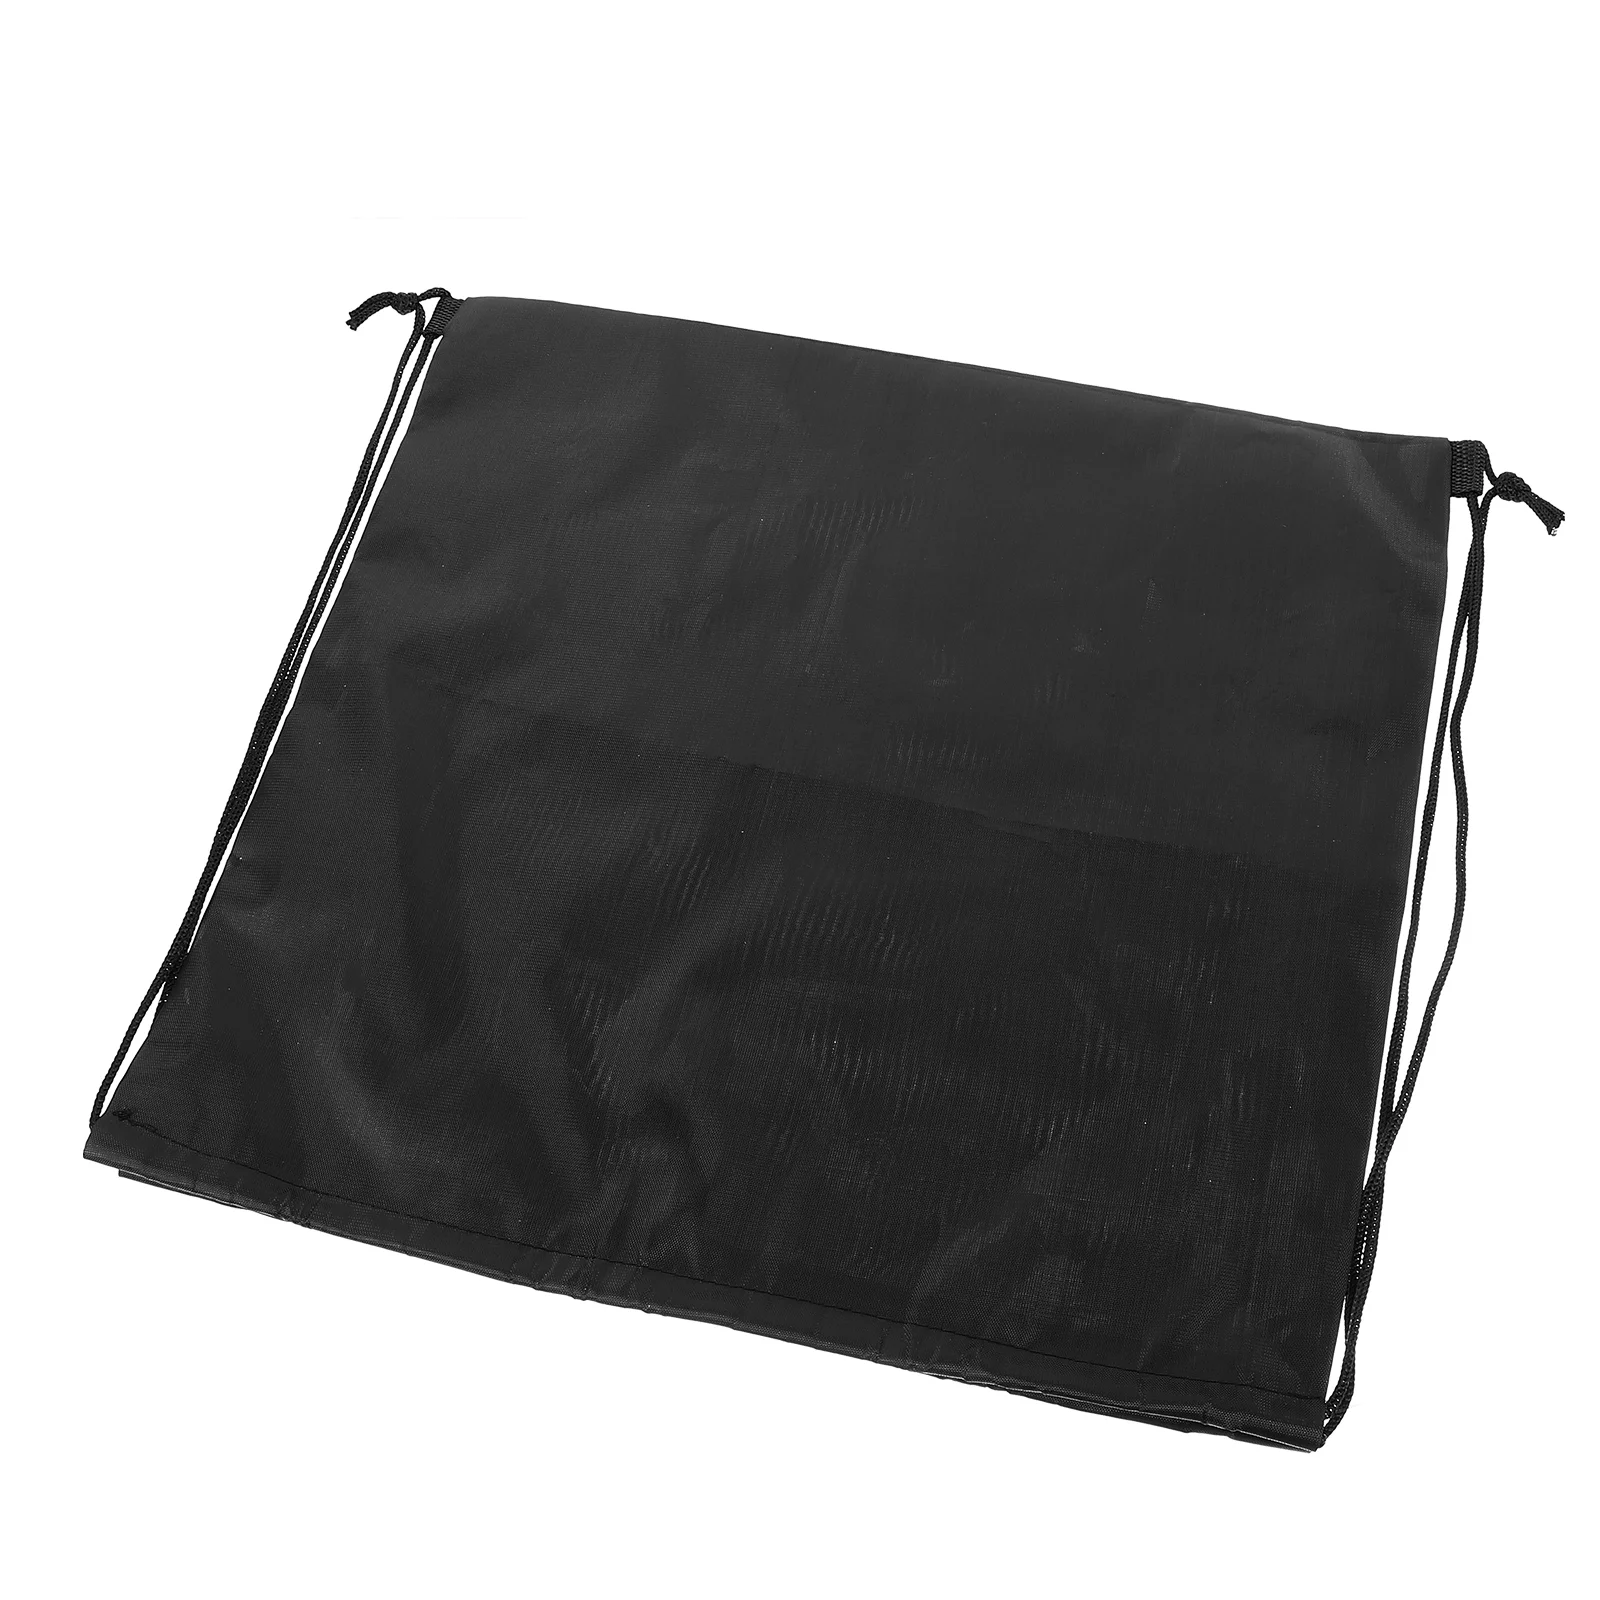 Portable Bag Drawstring Pouch Outdoor Motorcycle Storage Bag 37 29cm 10pcs set portable drawstring shoes clear storage bag dust bags travel pouch 2021 high quality